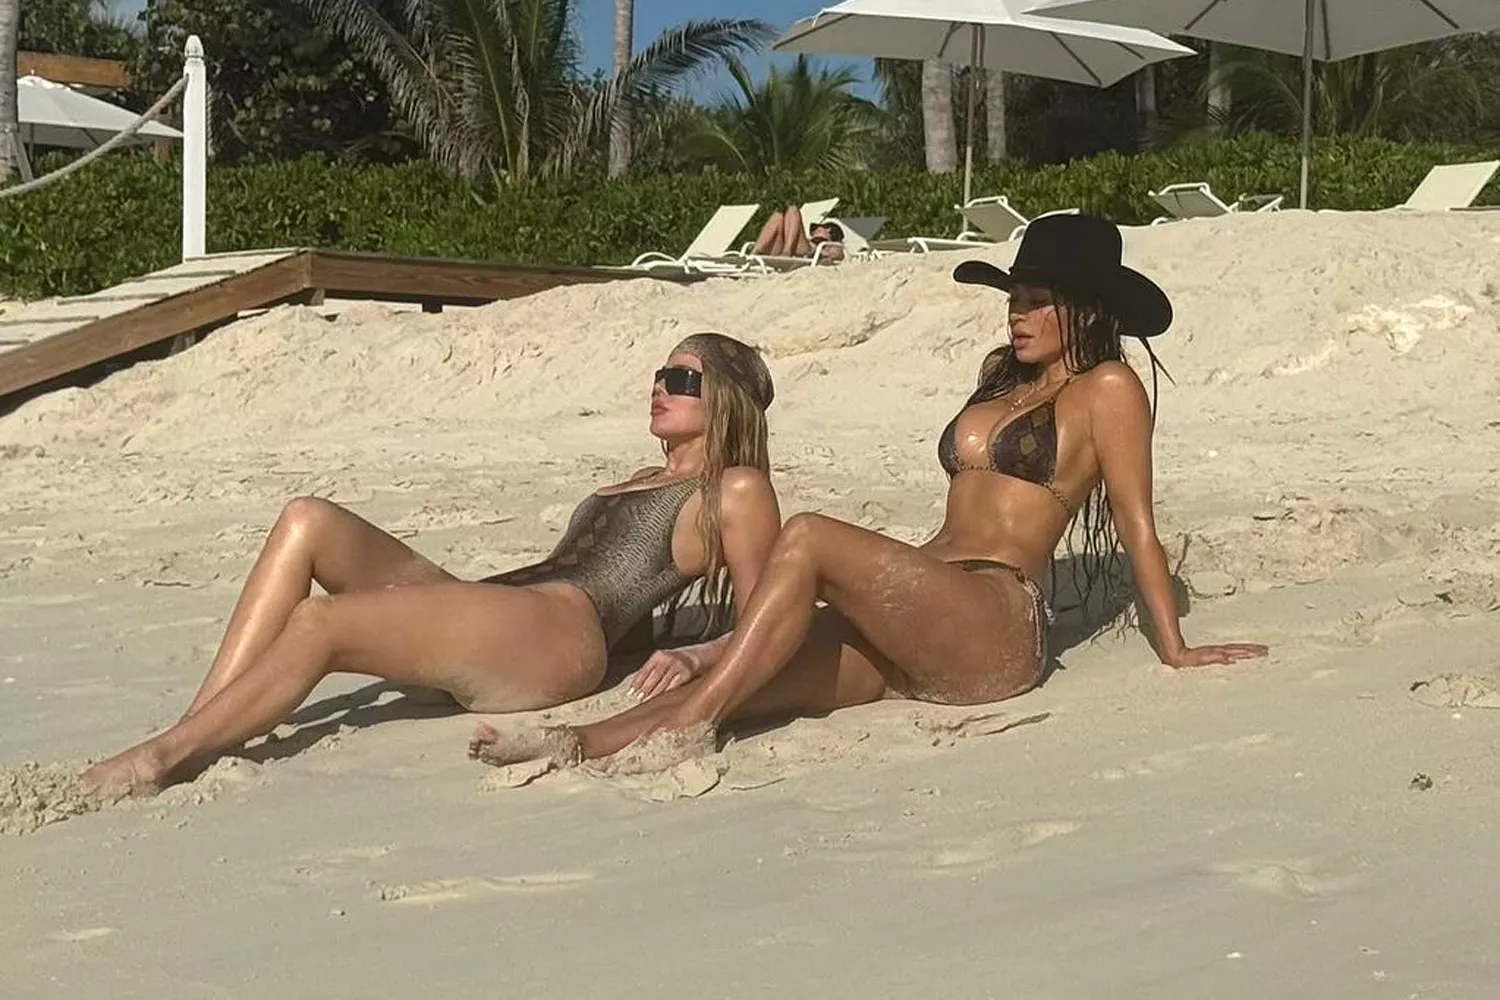 KIm Kardashain posted sexy bikini pictures with Khloe  on their vacation see details